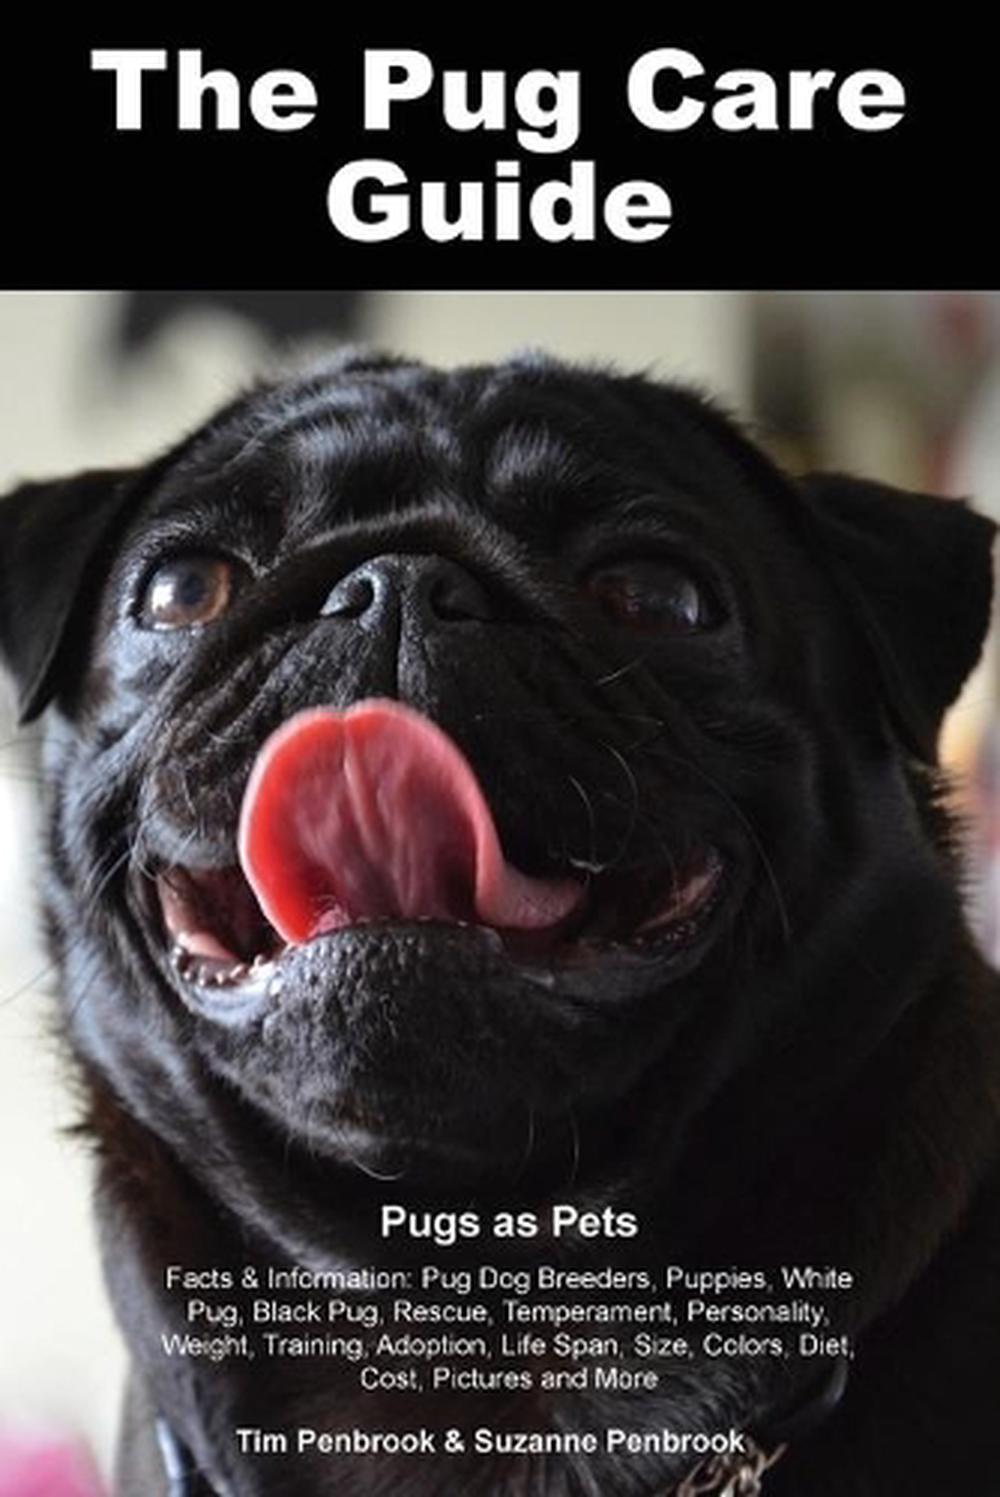 The Pug Care Guide. Pugs as Pets Facts & Information Pug